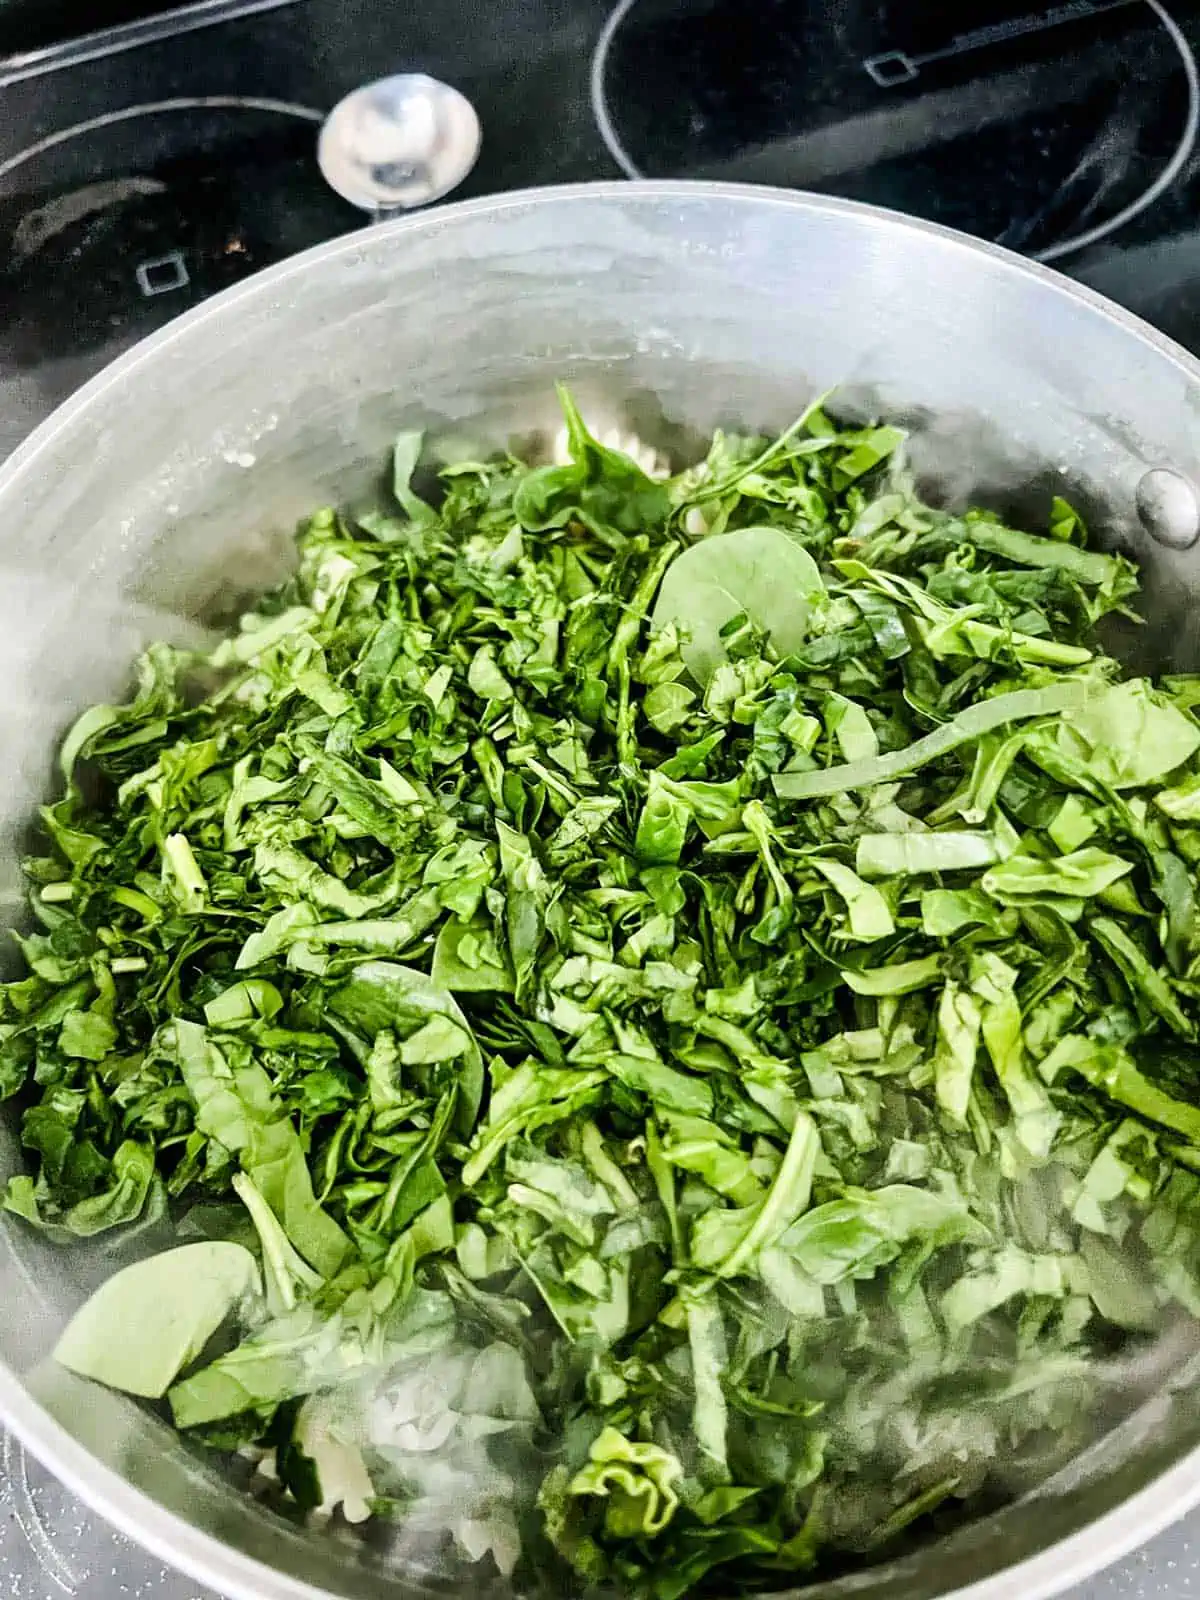 Spinach that has just been added to a saucepan of freshly cooked pasta.